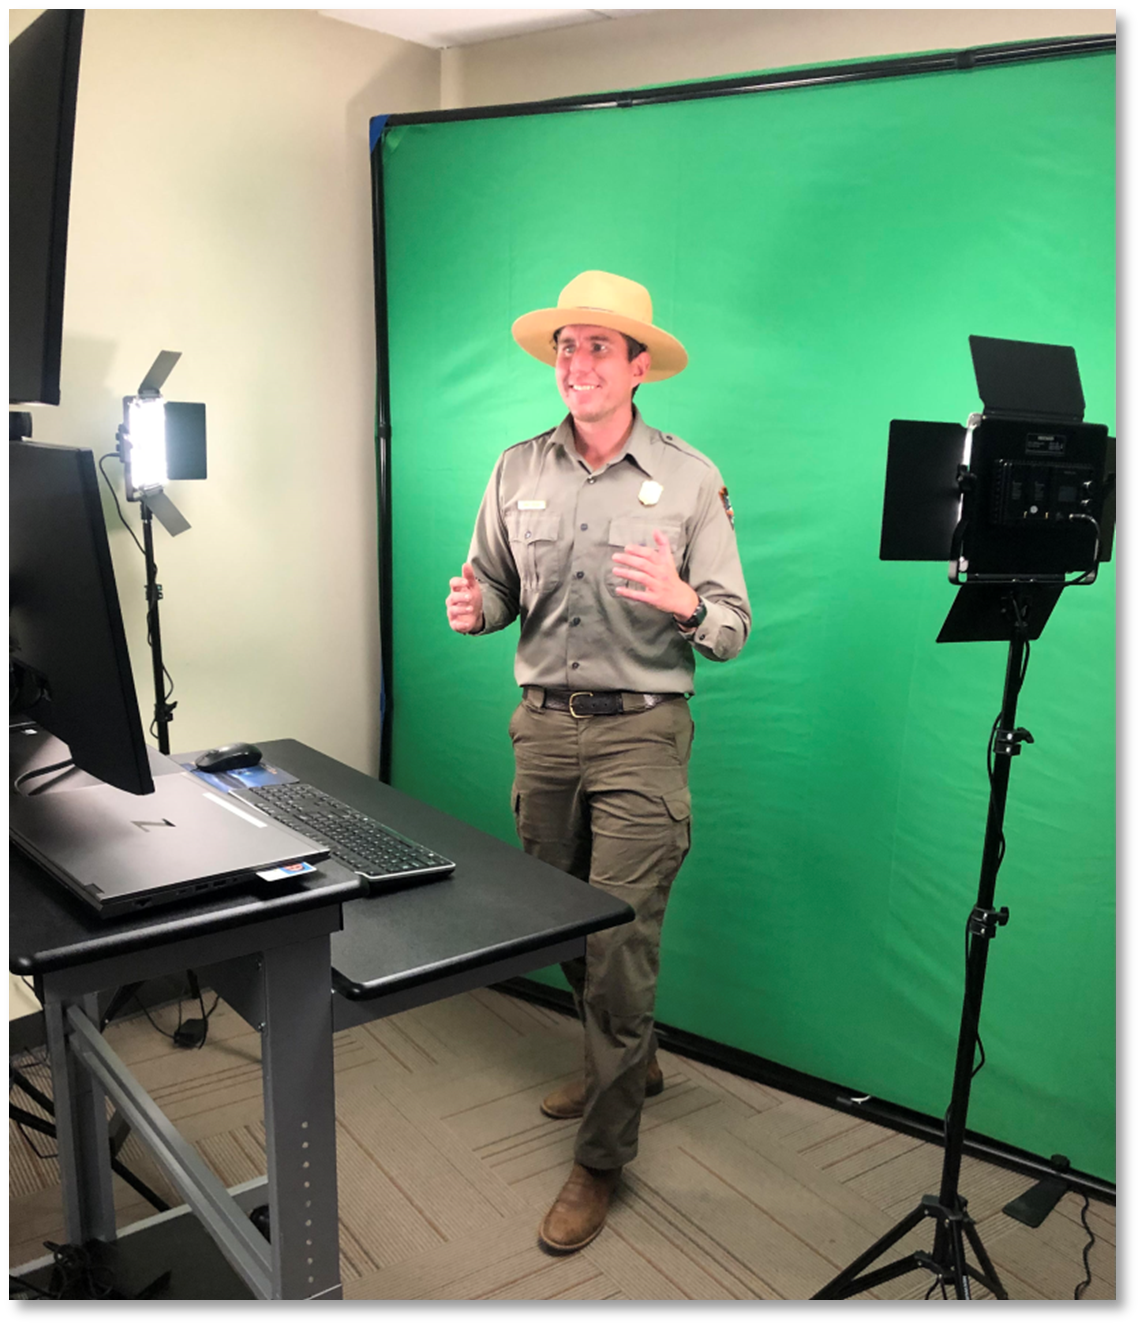 Ranger presents a program on camera in front of a green screen.